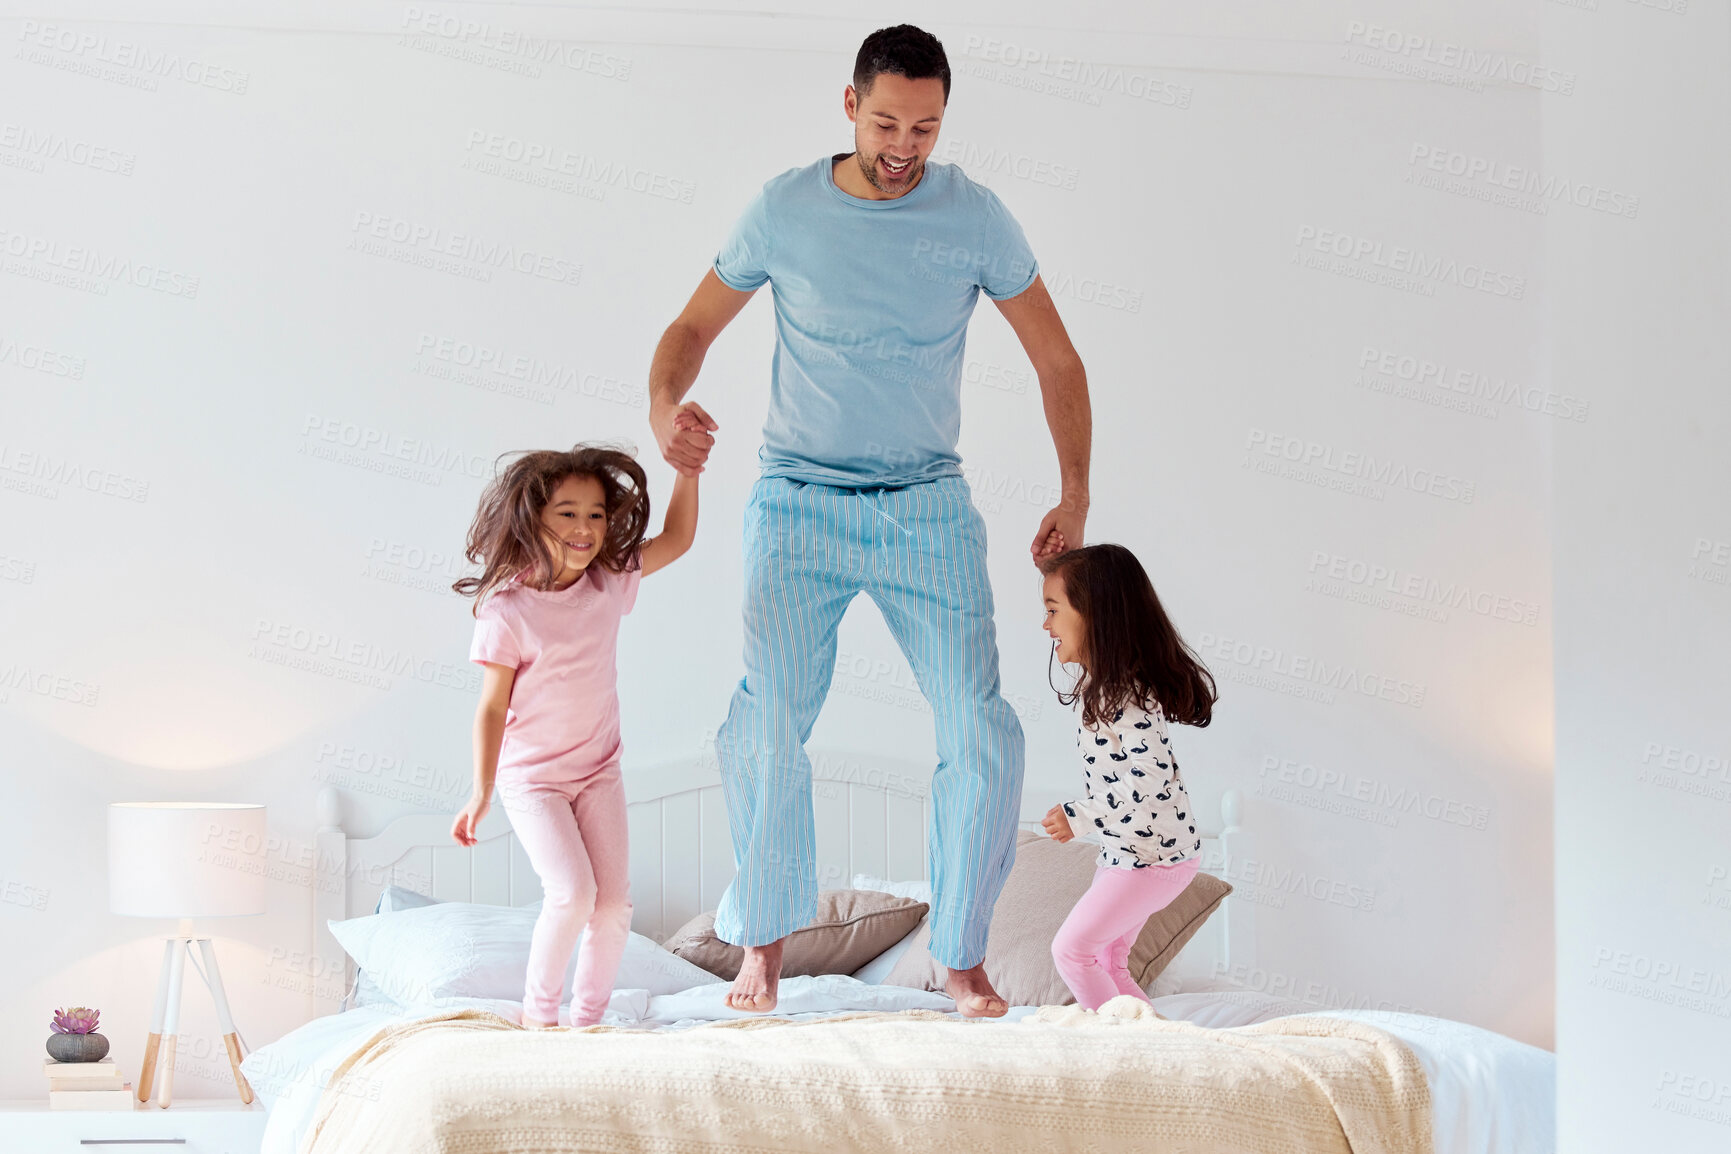 Buy stock photo Shot of a man jumping on a bed with his two daughters